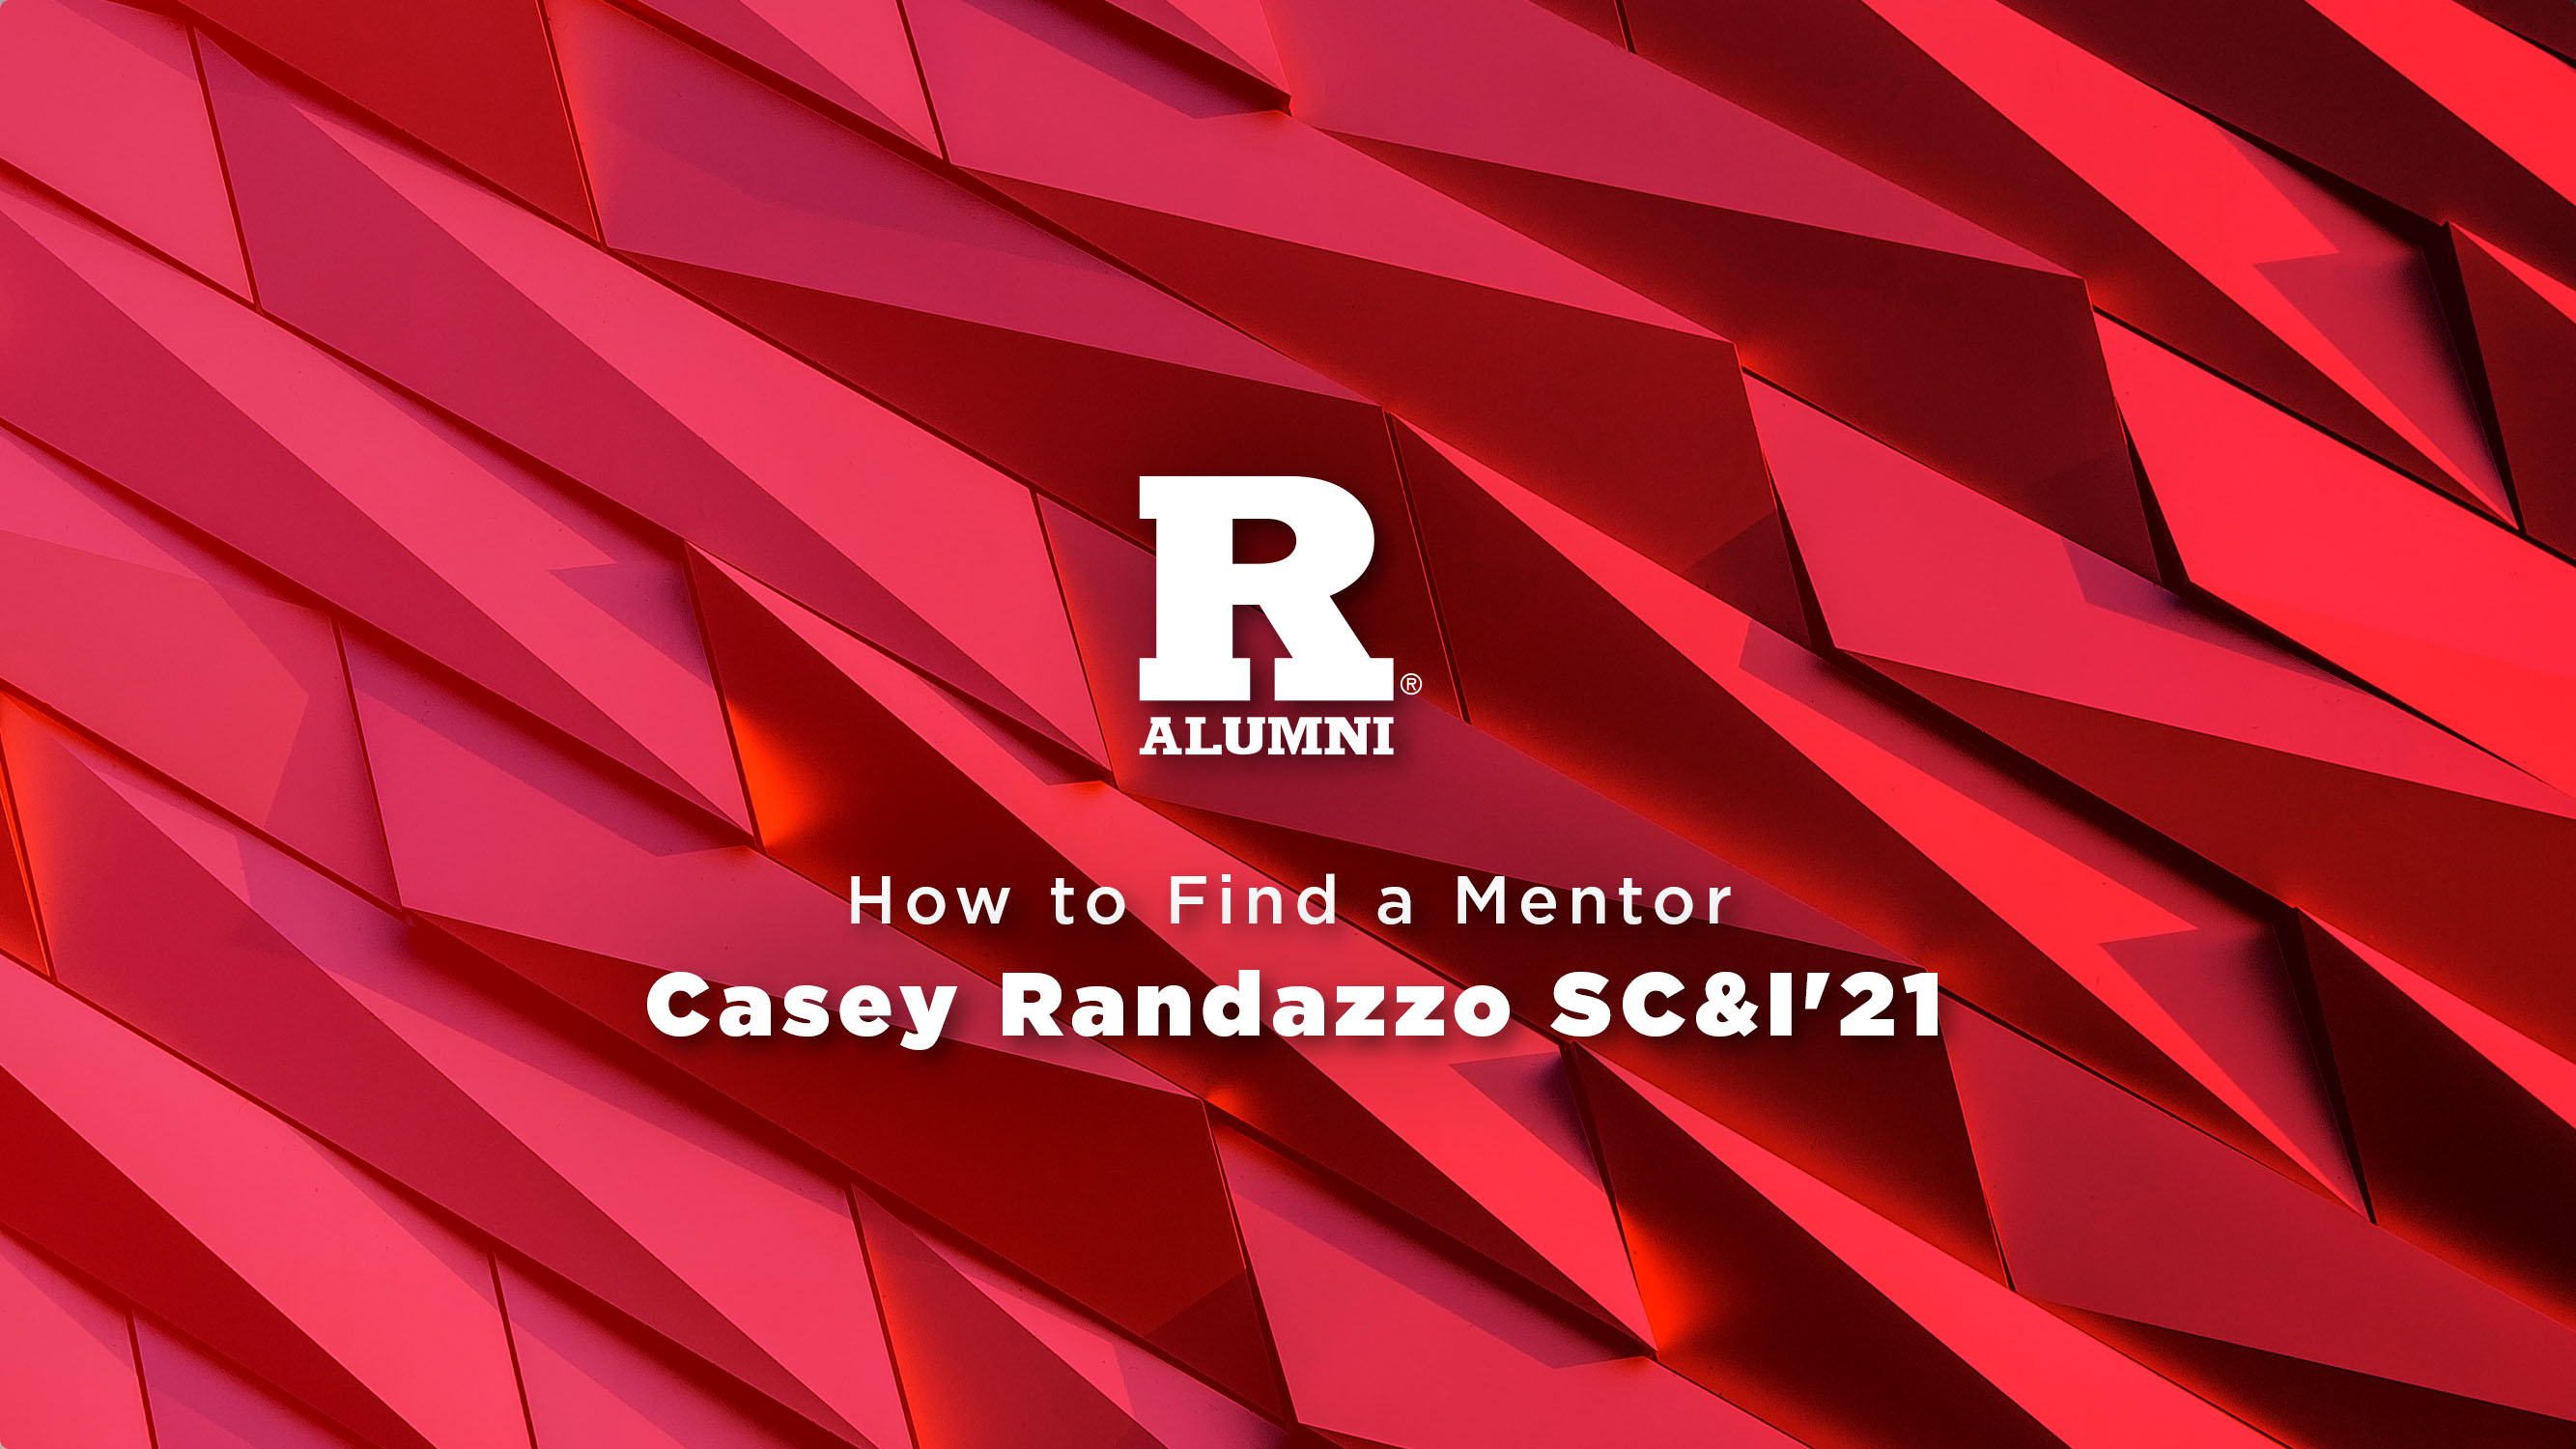 Image for How to Find a Mentor with Casey Randazzo SC&I'21 webinar